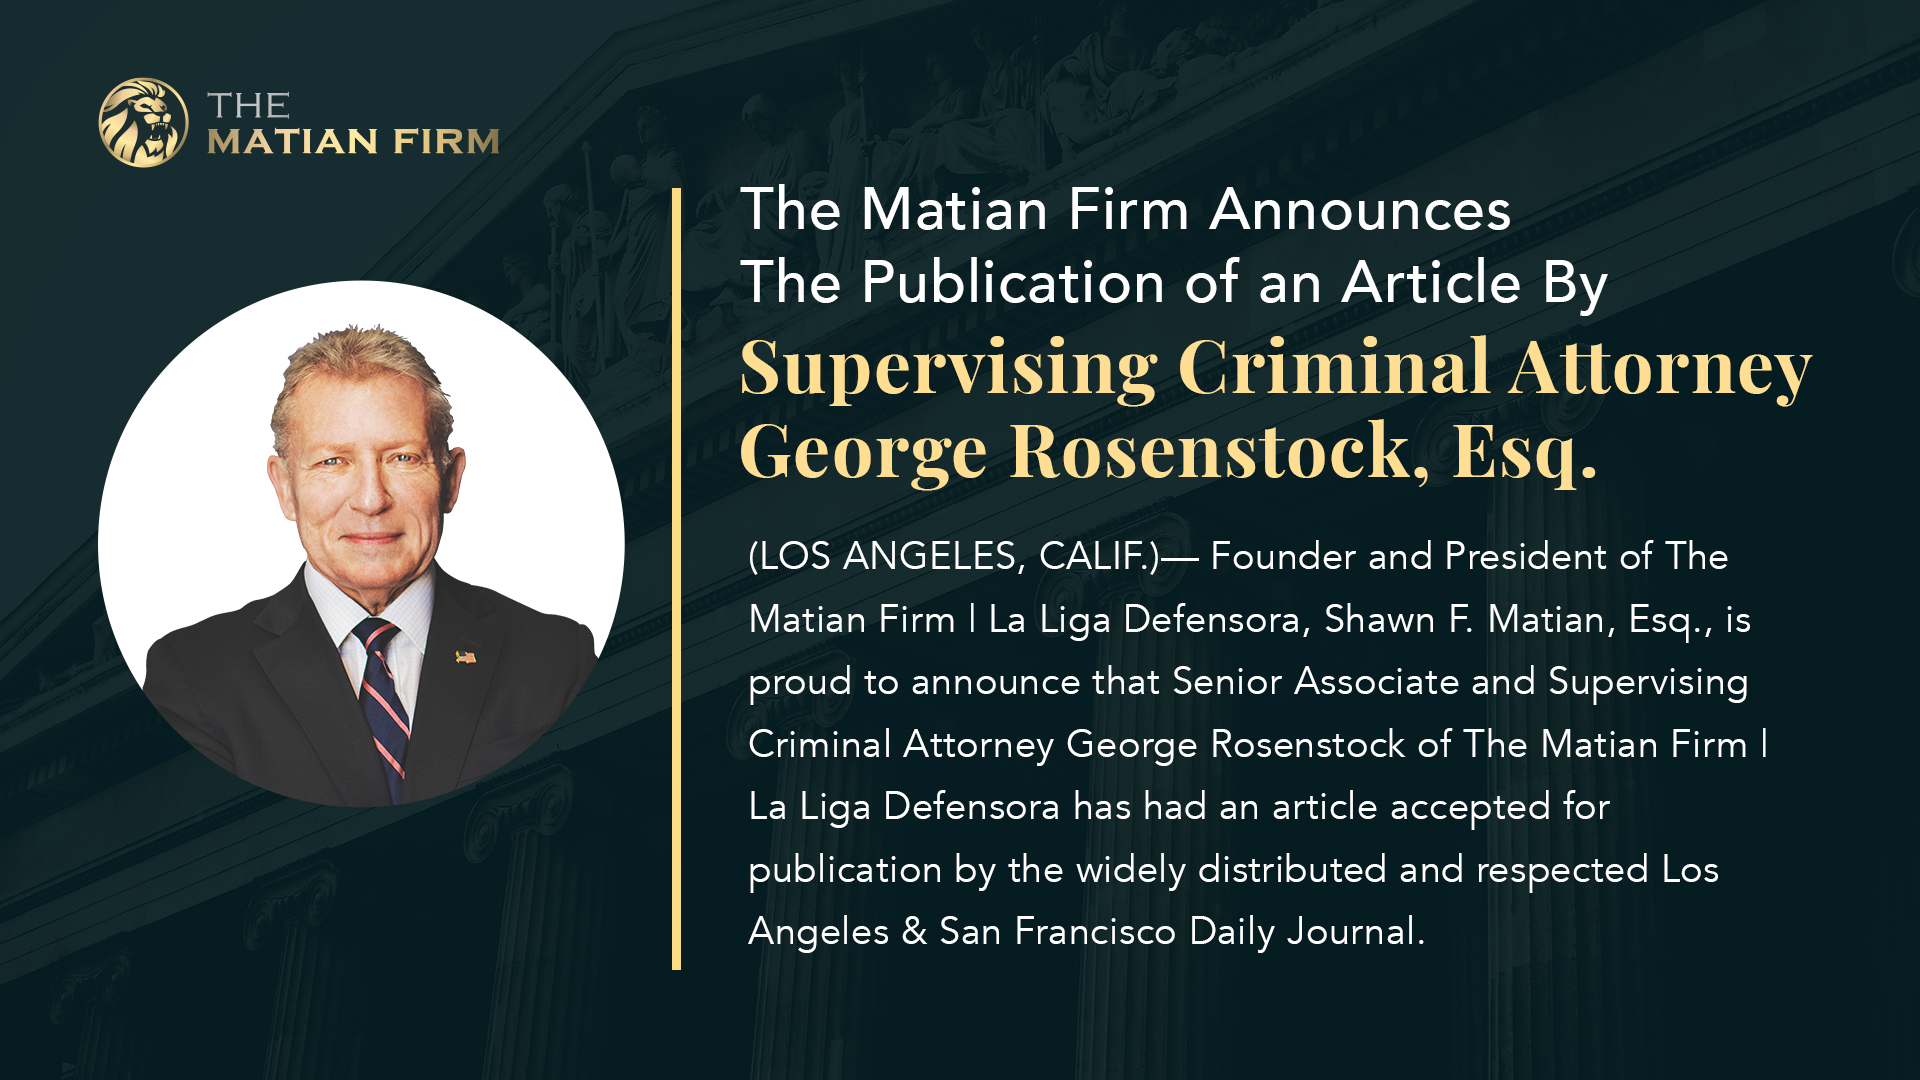 The Matian Firm Announces The Publication of an Article By Supervising Criminal Attorney George Rosenstock, Esq.